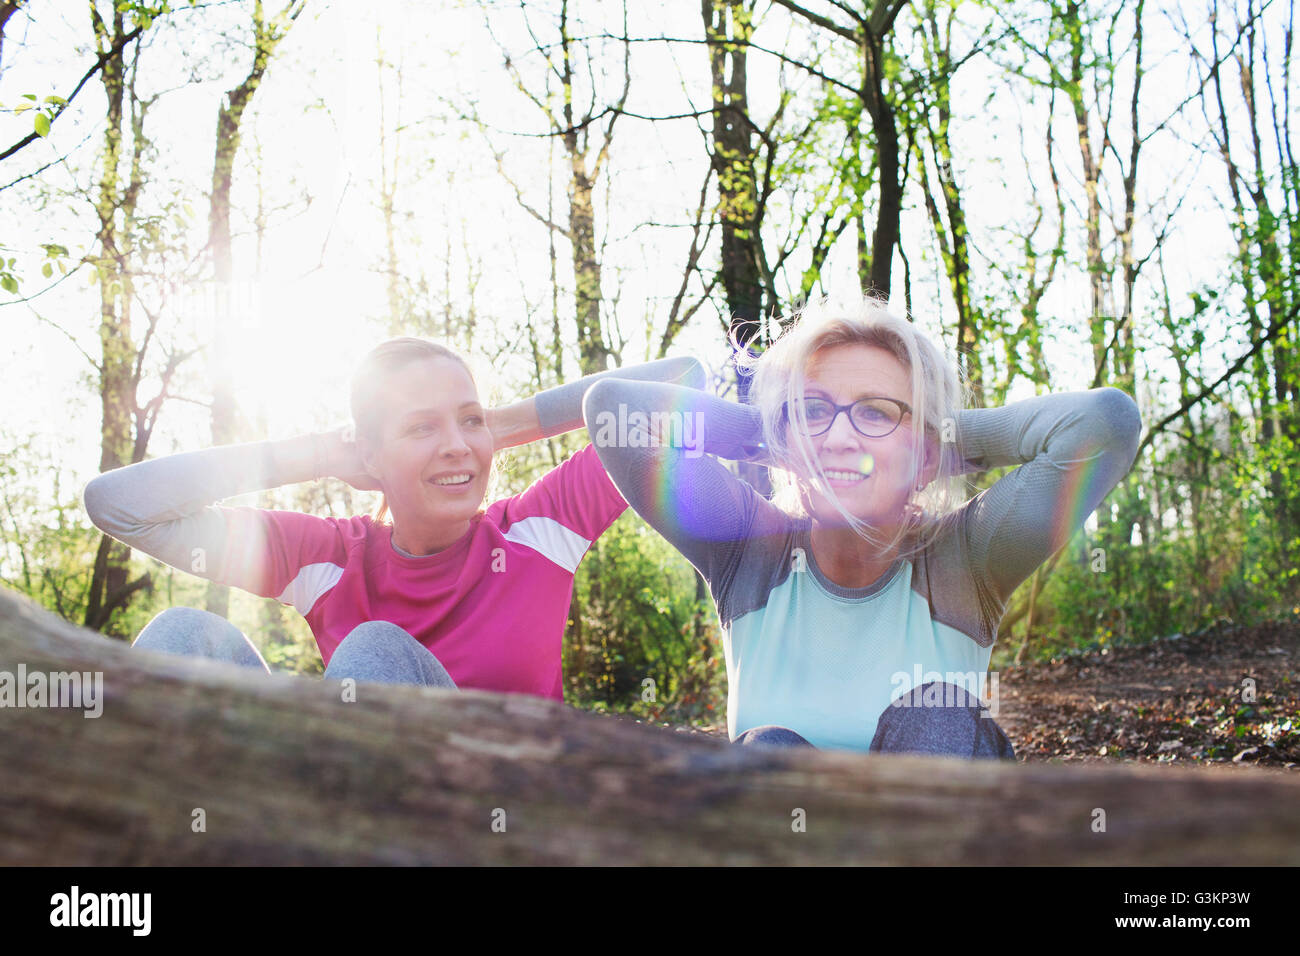 Women in forest hands behind head doing sit up against fallen tree Stock Photo